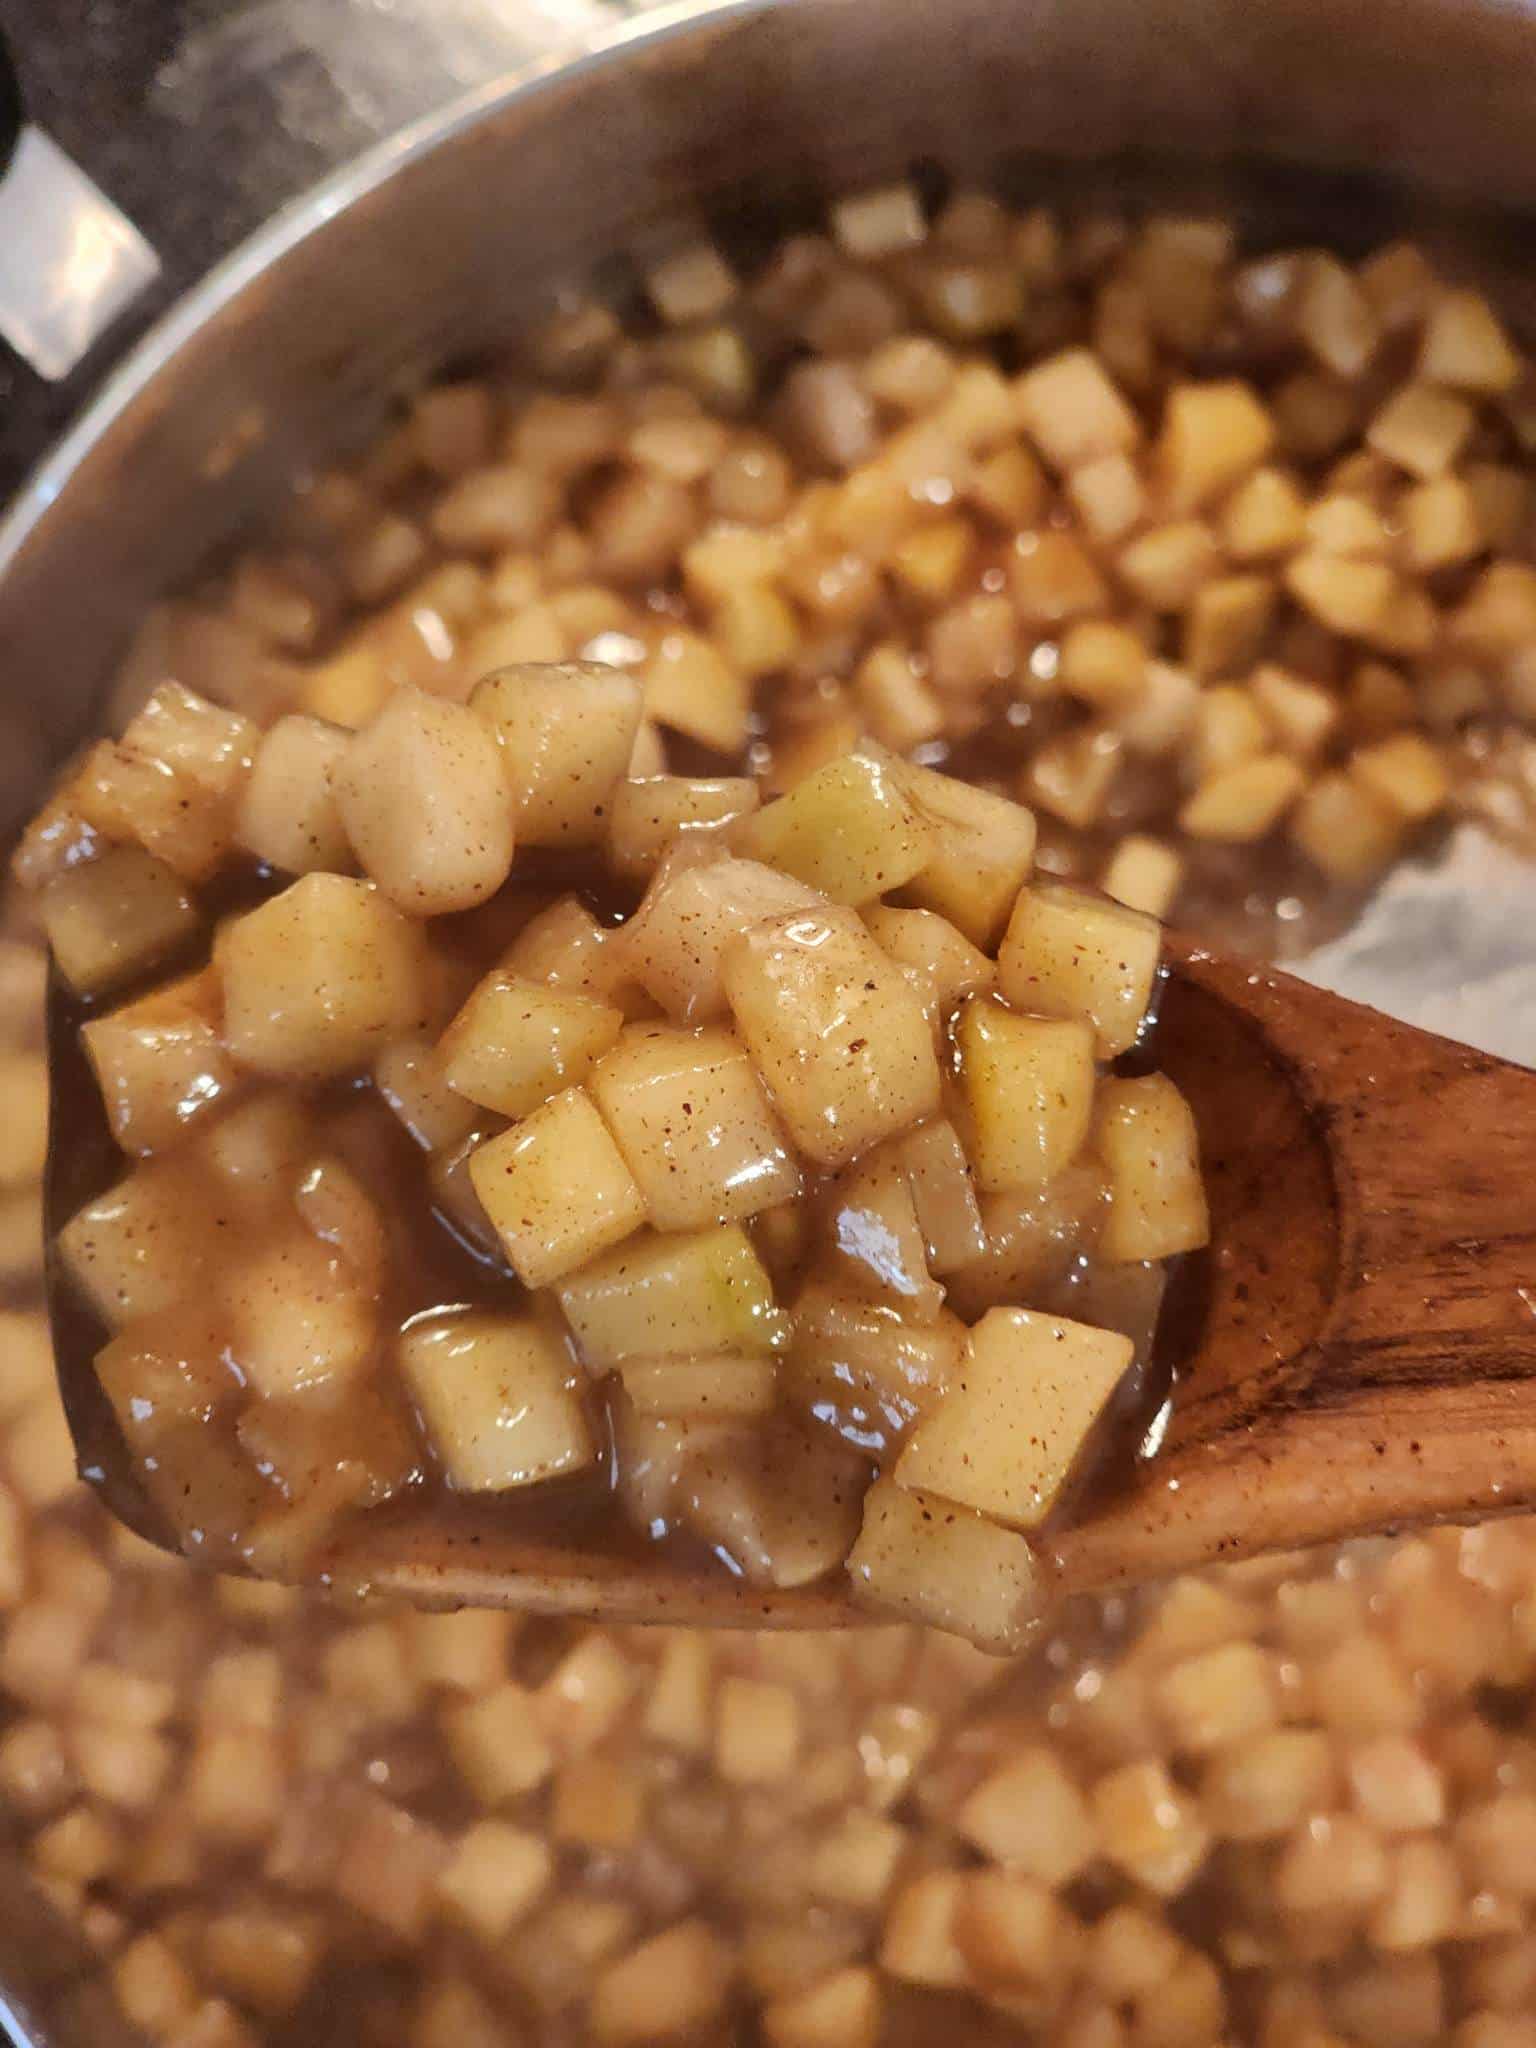 An overhead shot of a wooden spoonful with apple compote on it showing small diced apples coated in spice-flecked sauce.